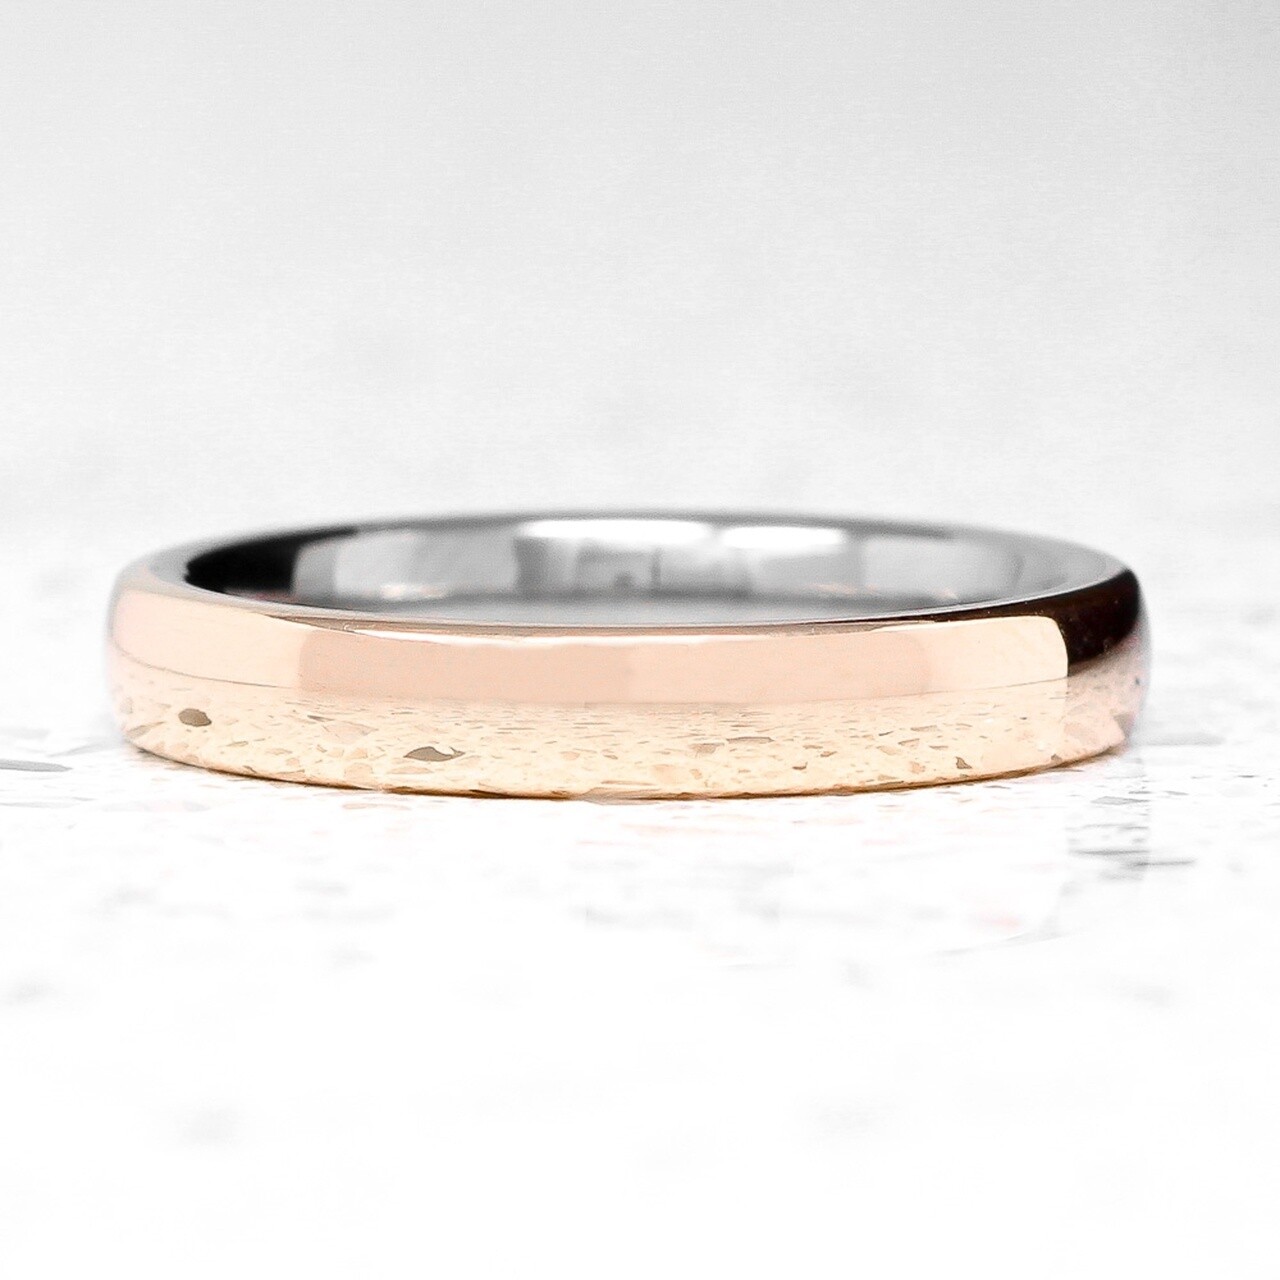 Polished 9ct Rose Gold and Titanium Ring - 4mm by Prism Design